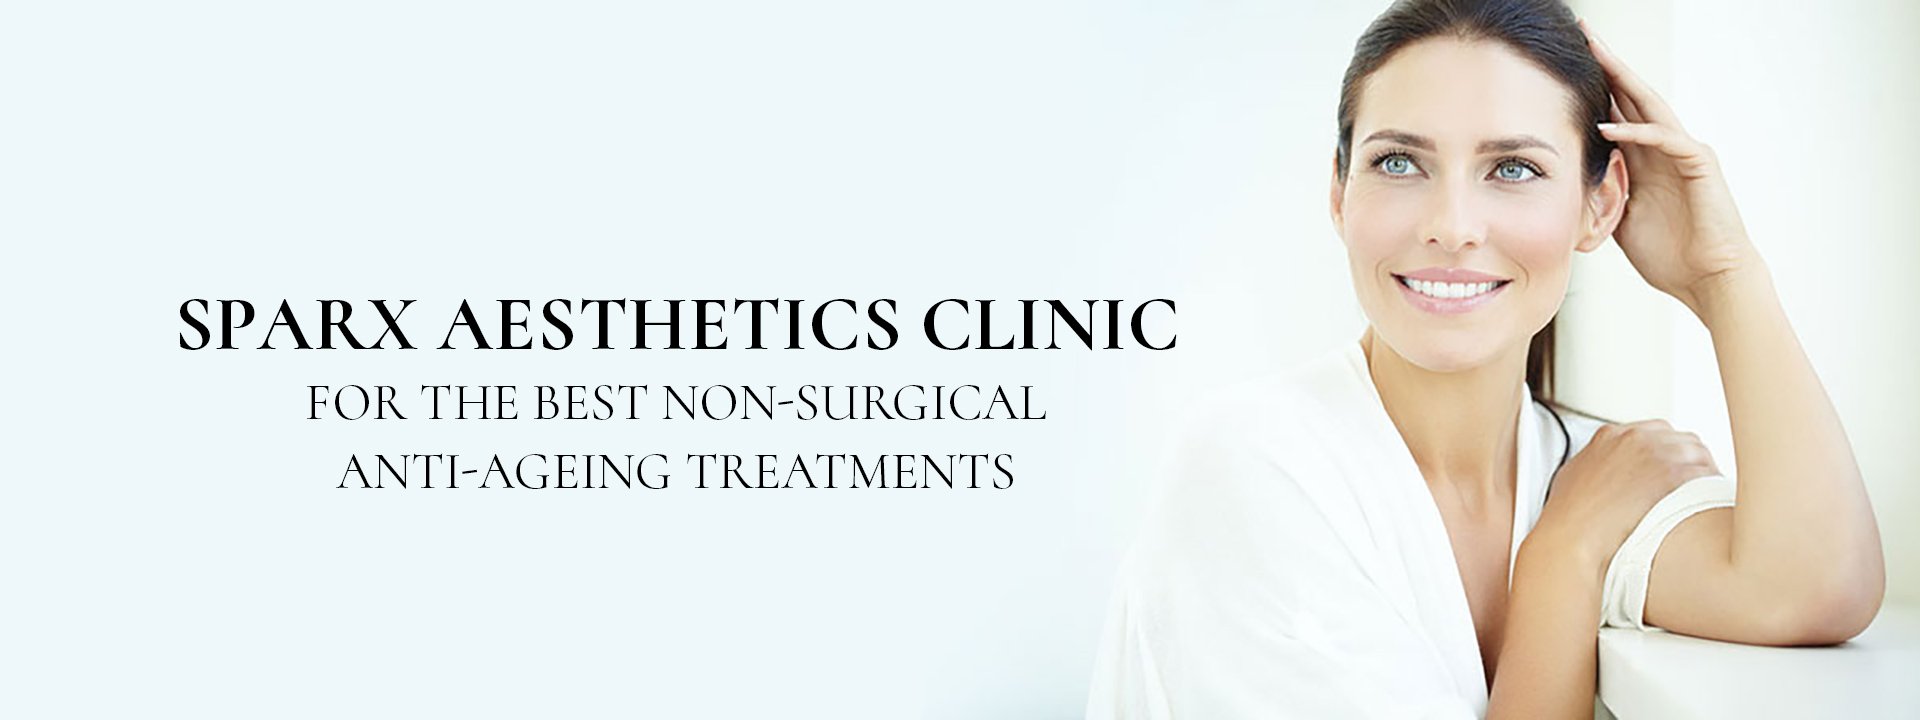 Sparx Winchester Aesthetics Clinic for the Best Non-Surgical Anti-Aging Treatments